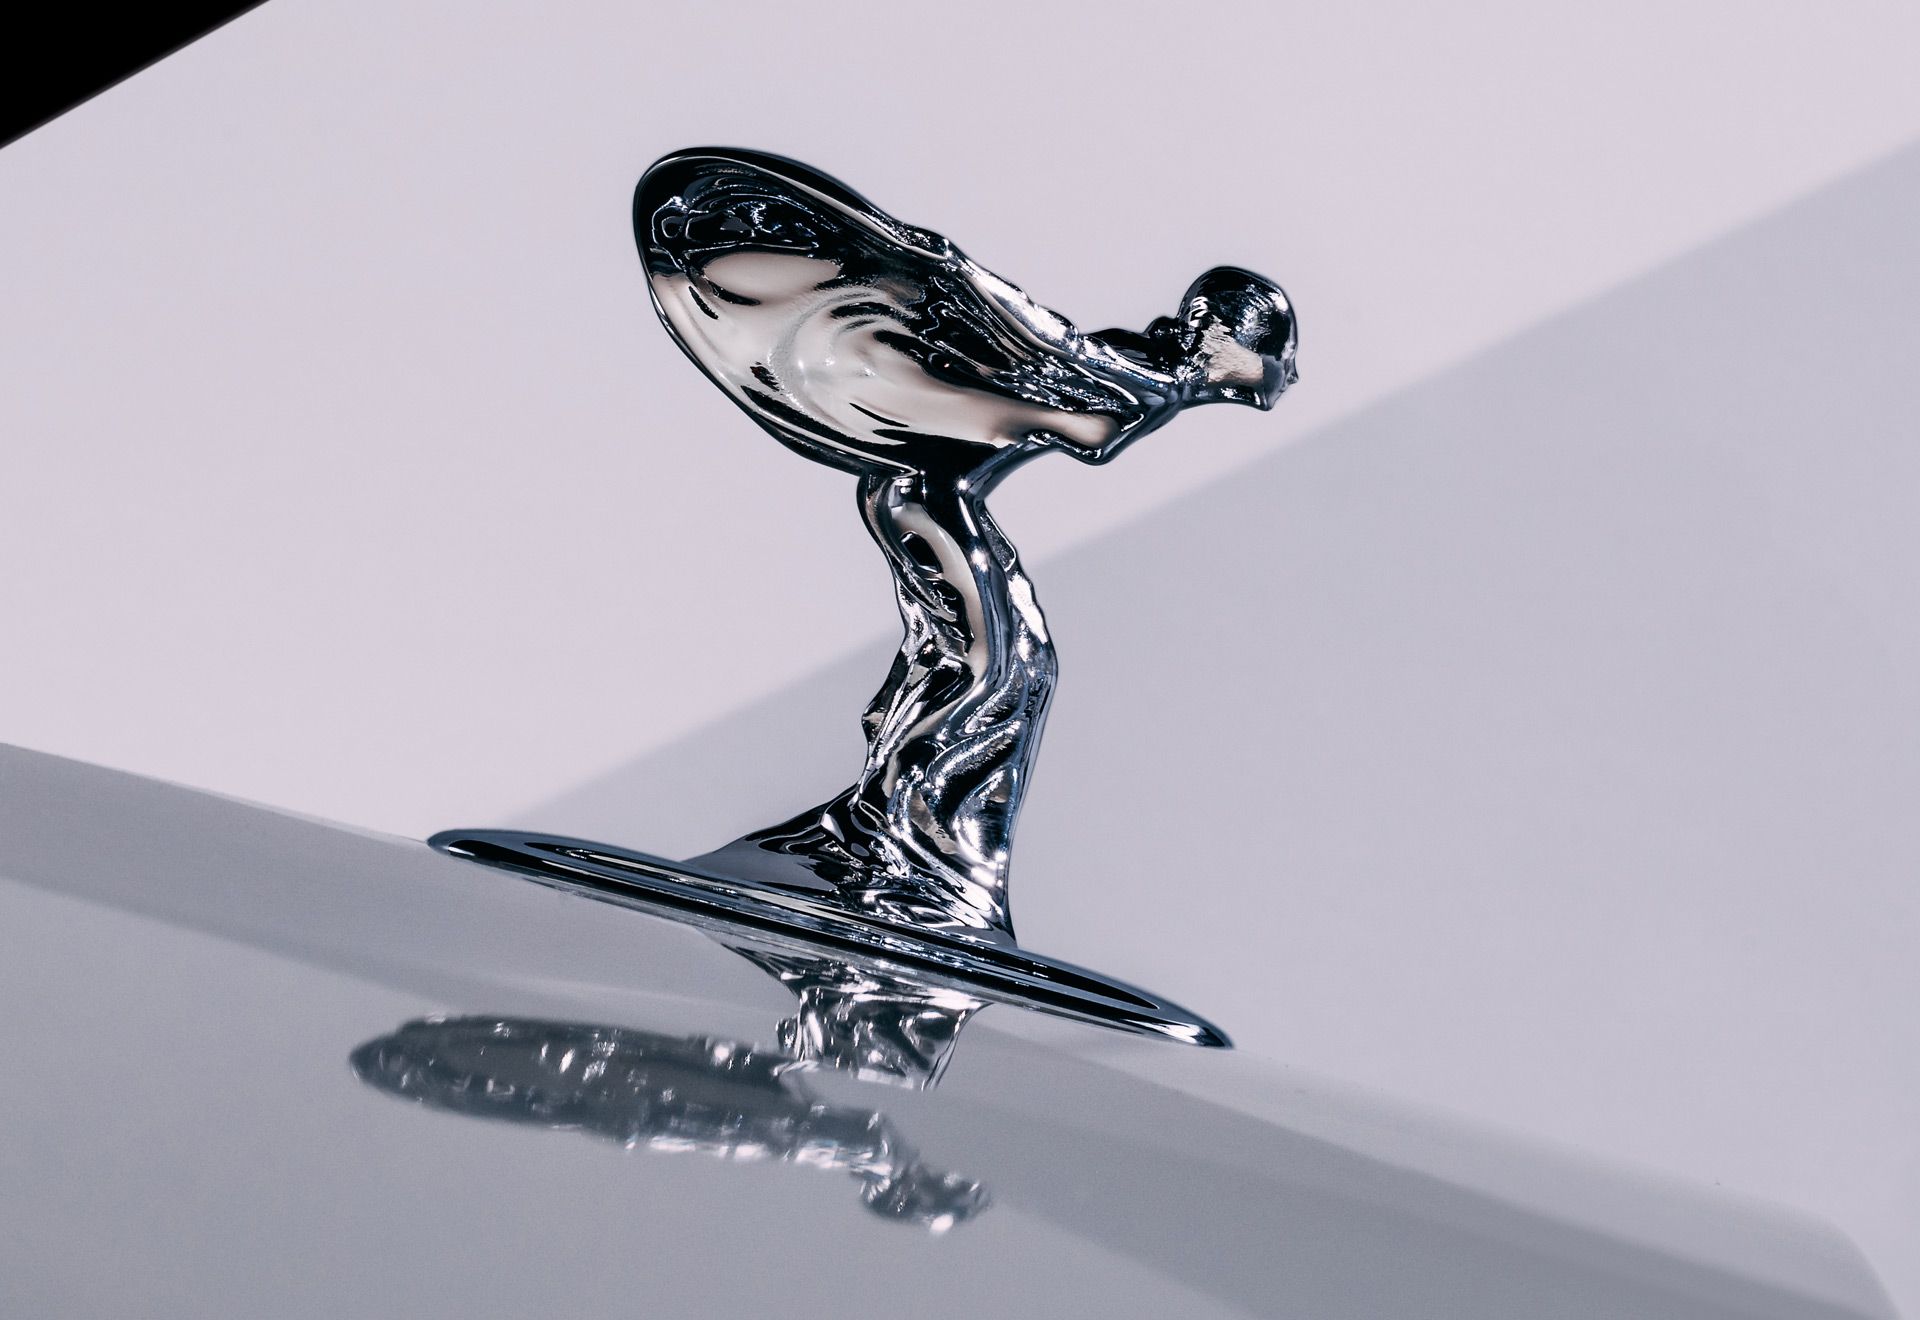 A Close-Up Shot Of The The Spirit Of Ecstasy